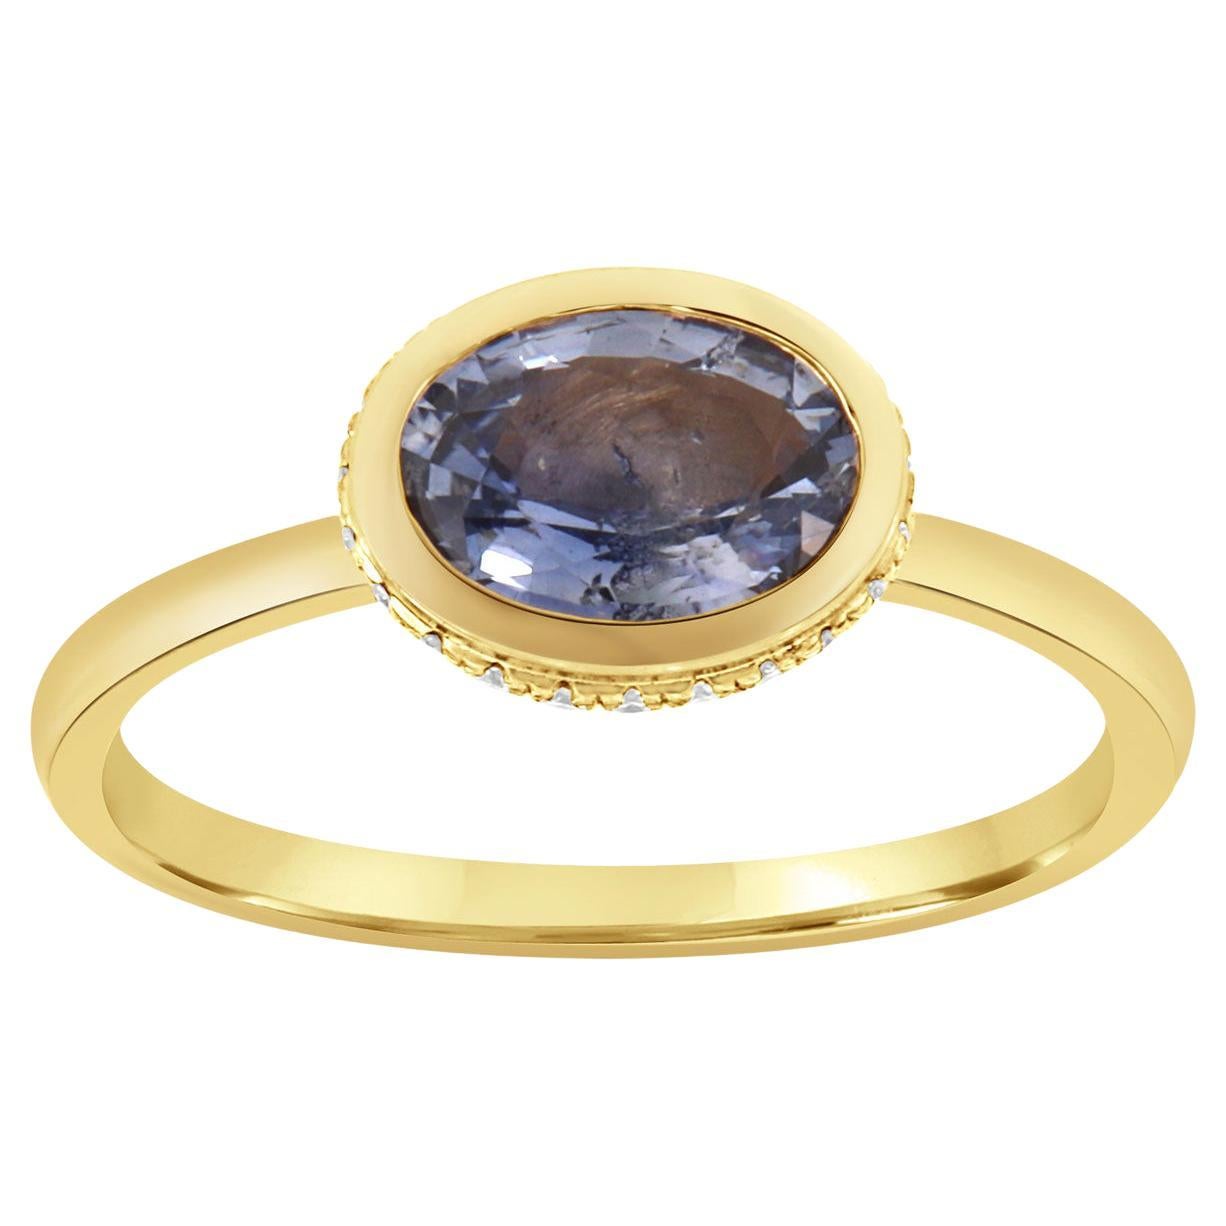 GIA Certified 1.11 Carat Oval "Ice Blue" Sapphire 18K Yellow Gold Diamond Ring